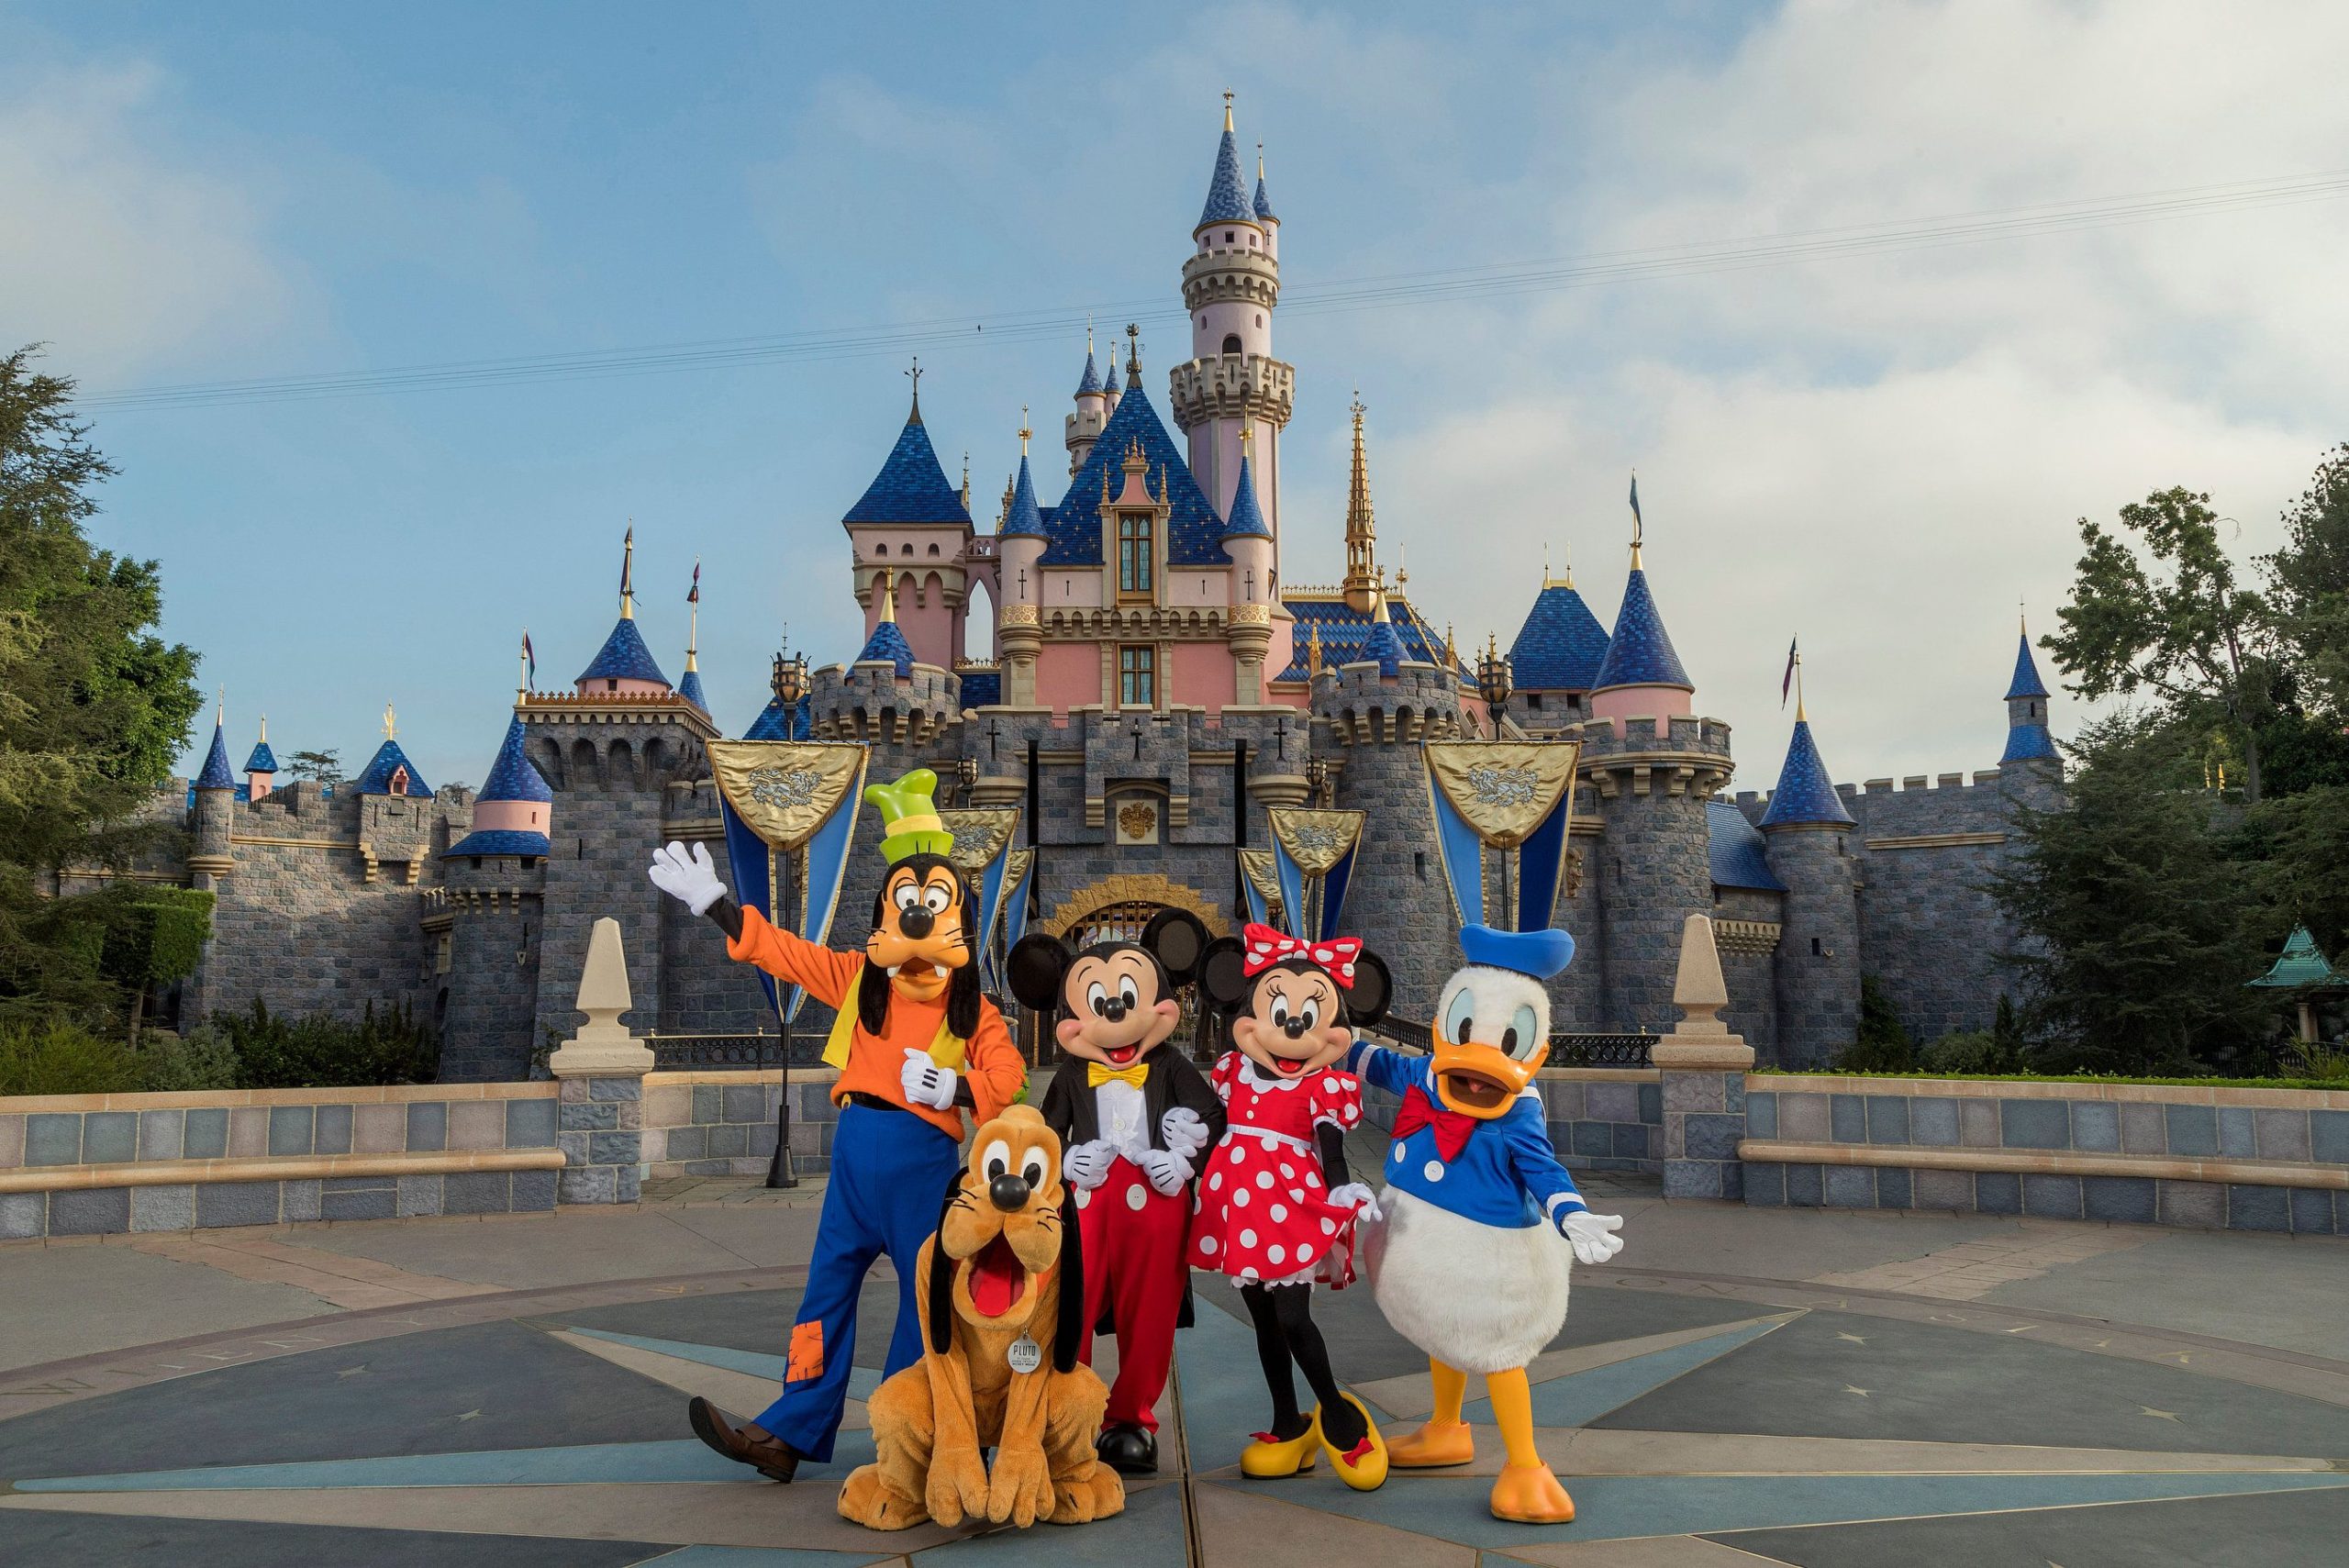 Disneyland Negligence Is Responsible for Her Chronic Bone Infection Claims Woman!